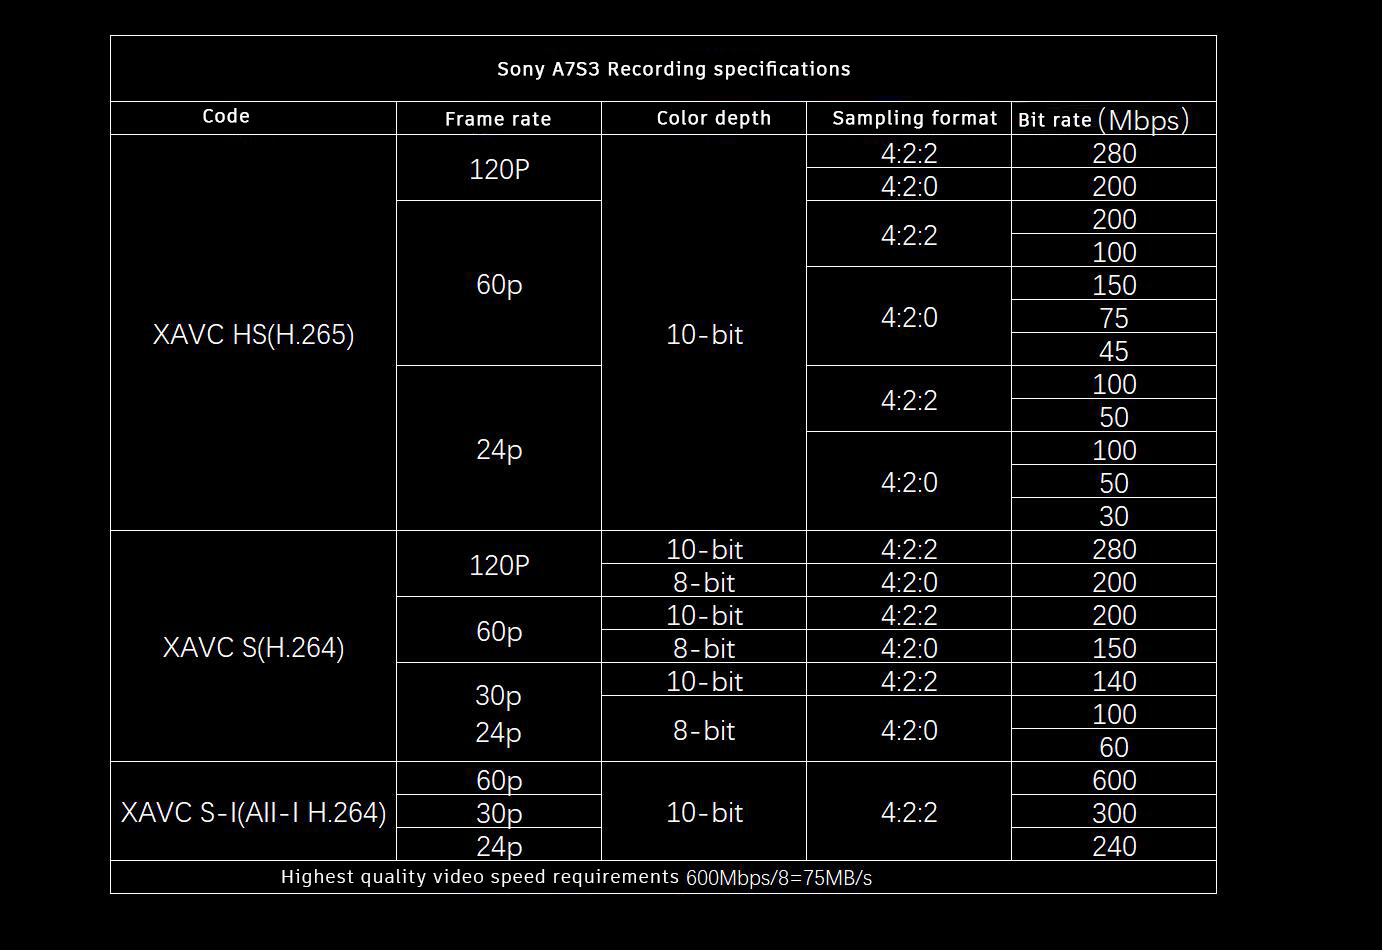 Sony A7S3 video specifications